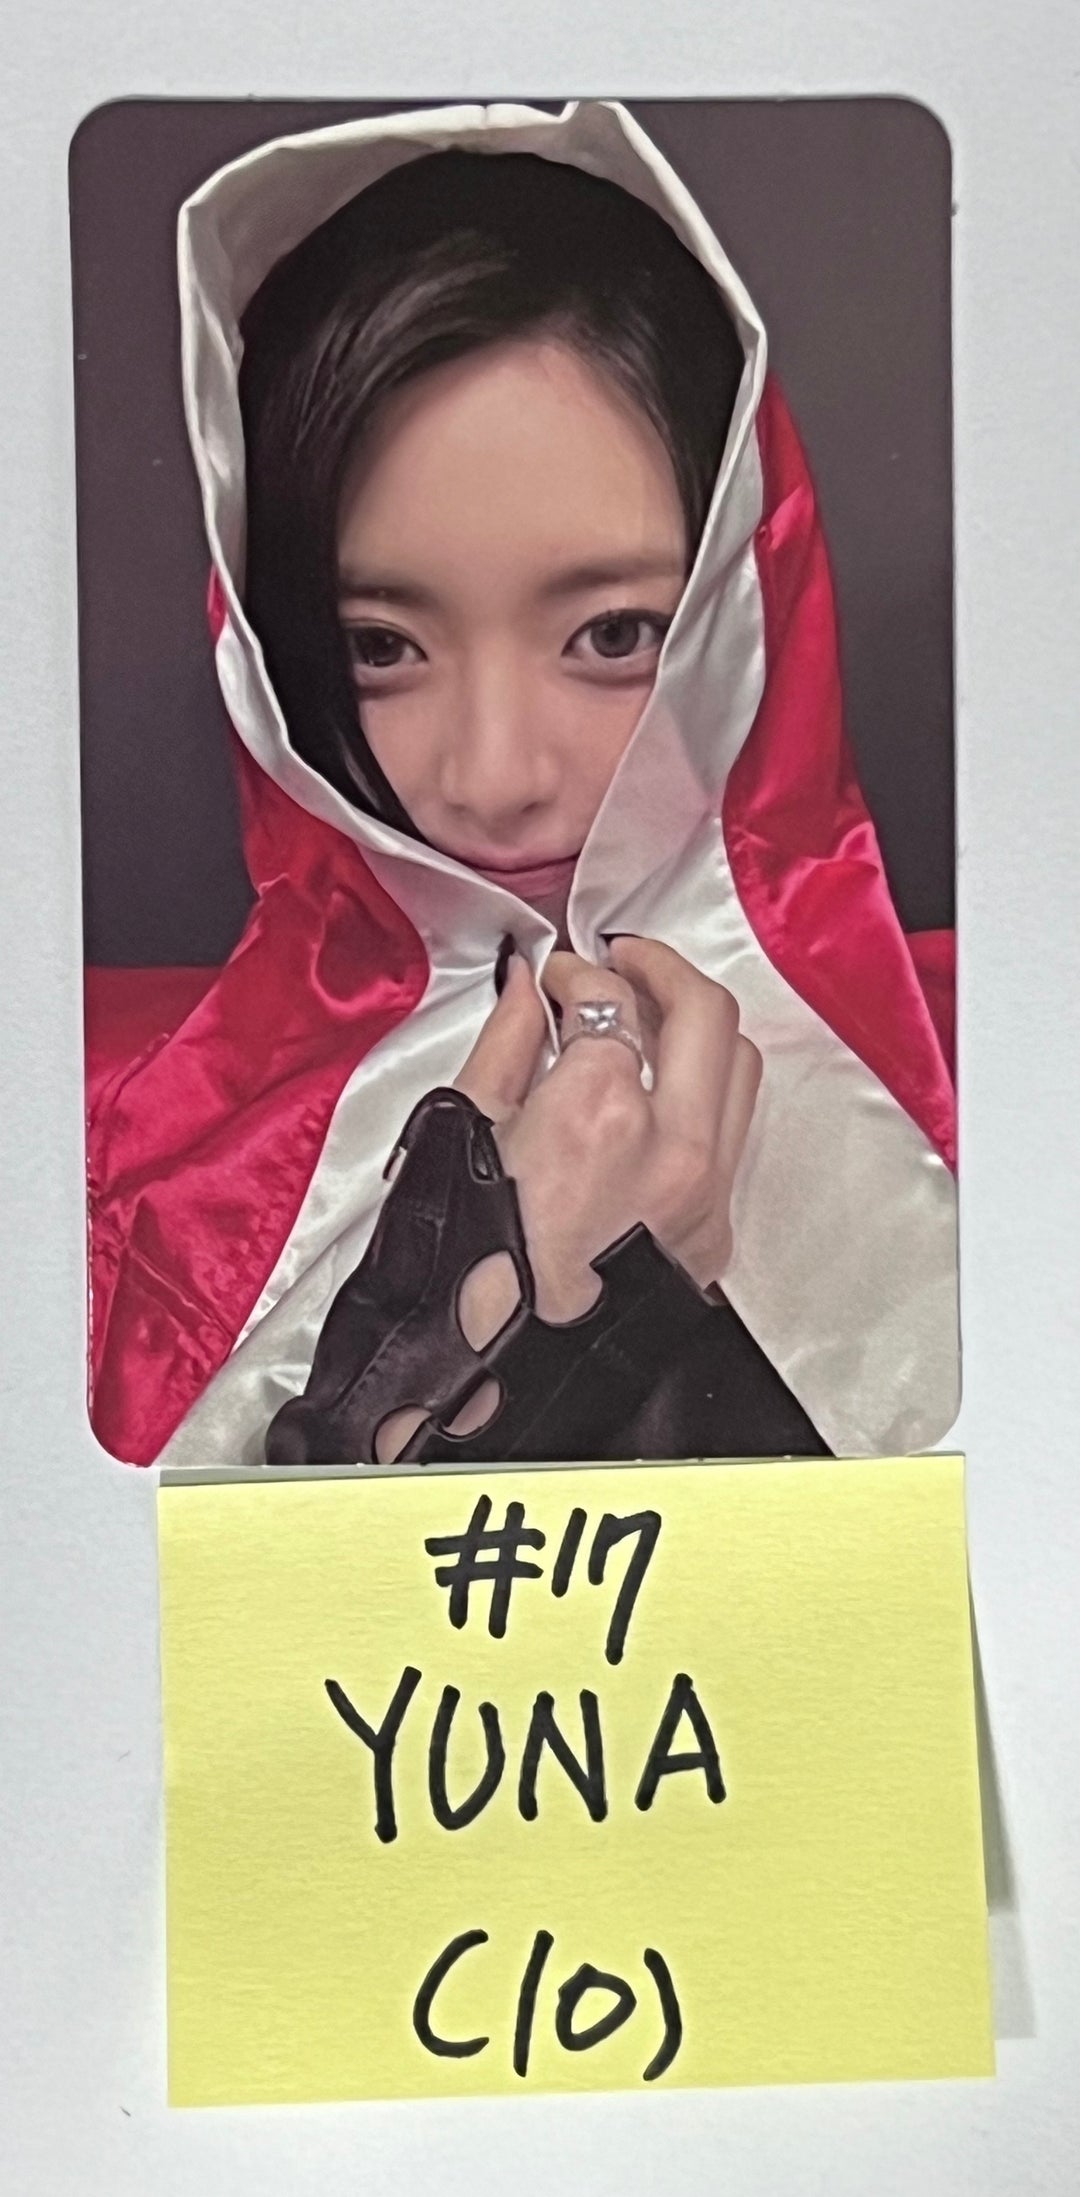 ITZY "KILL MY DOUBT" - Official Photocard & Ticket [Restocked 8/4]